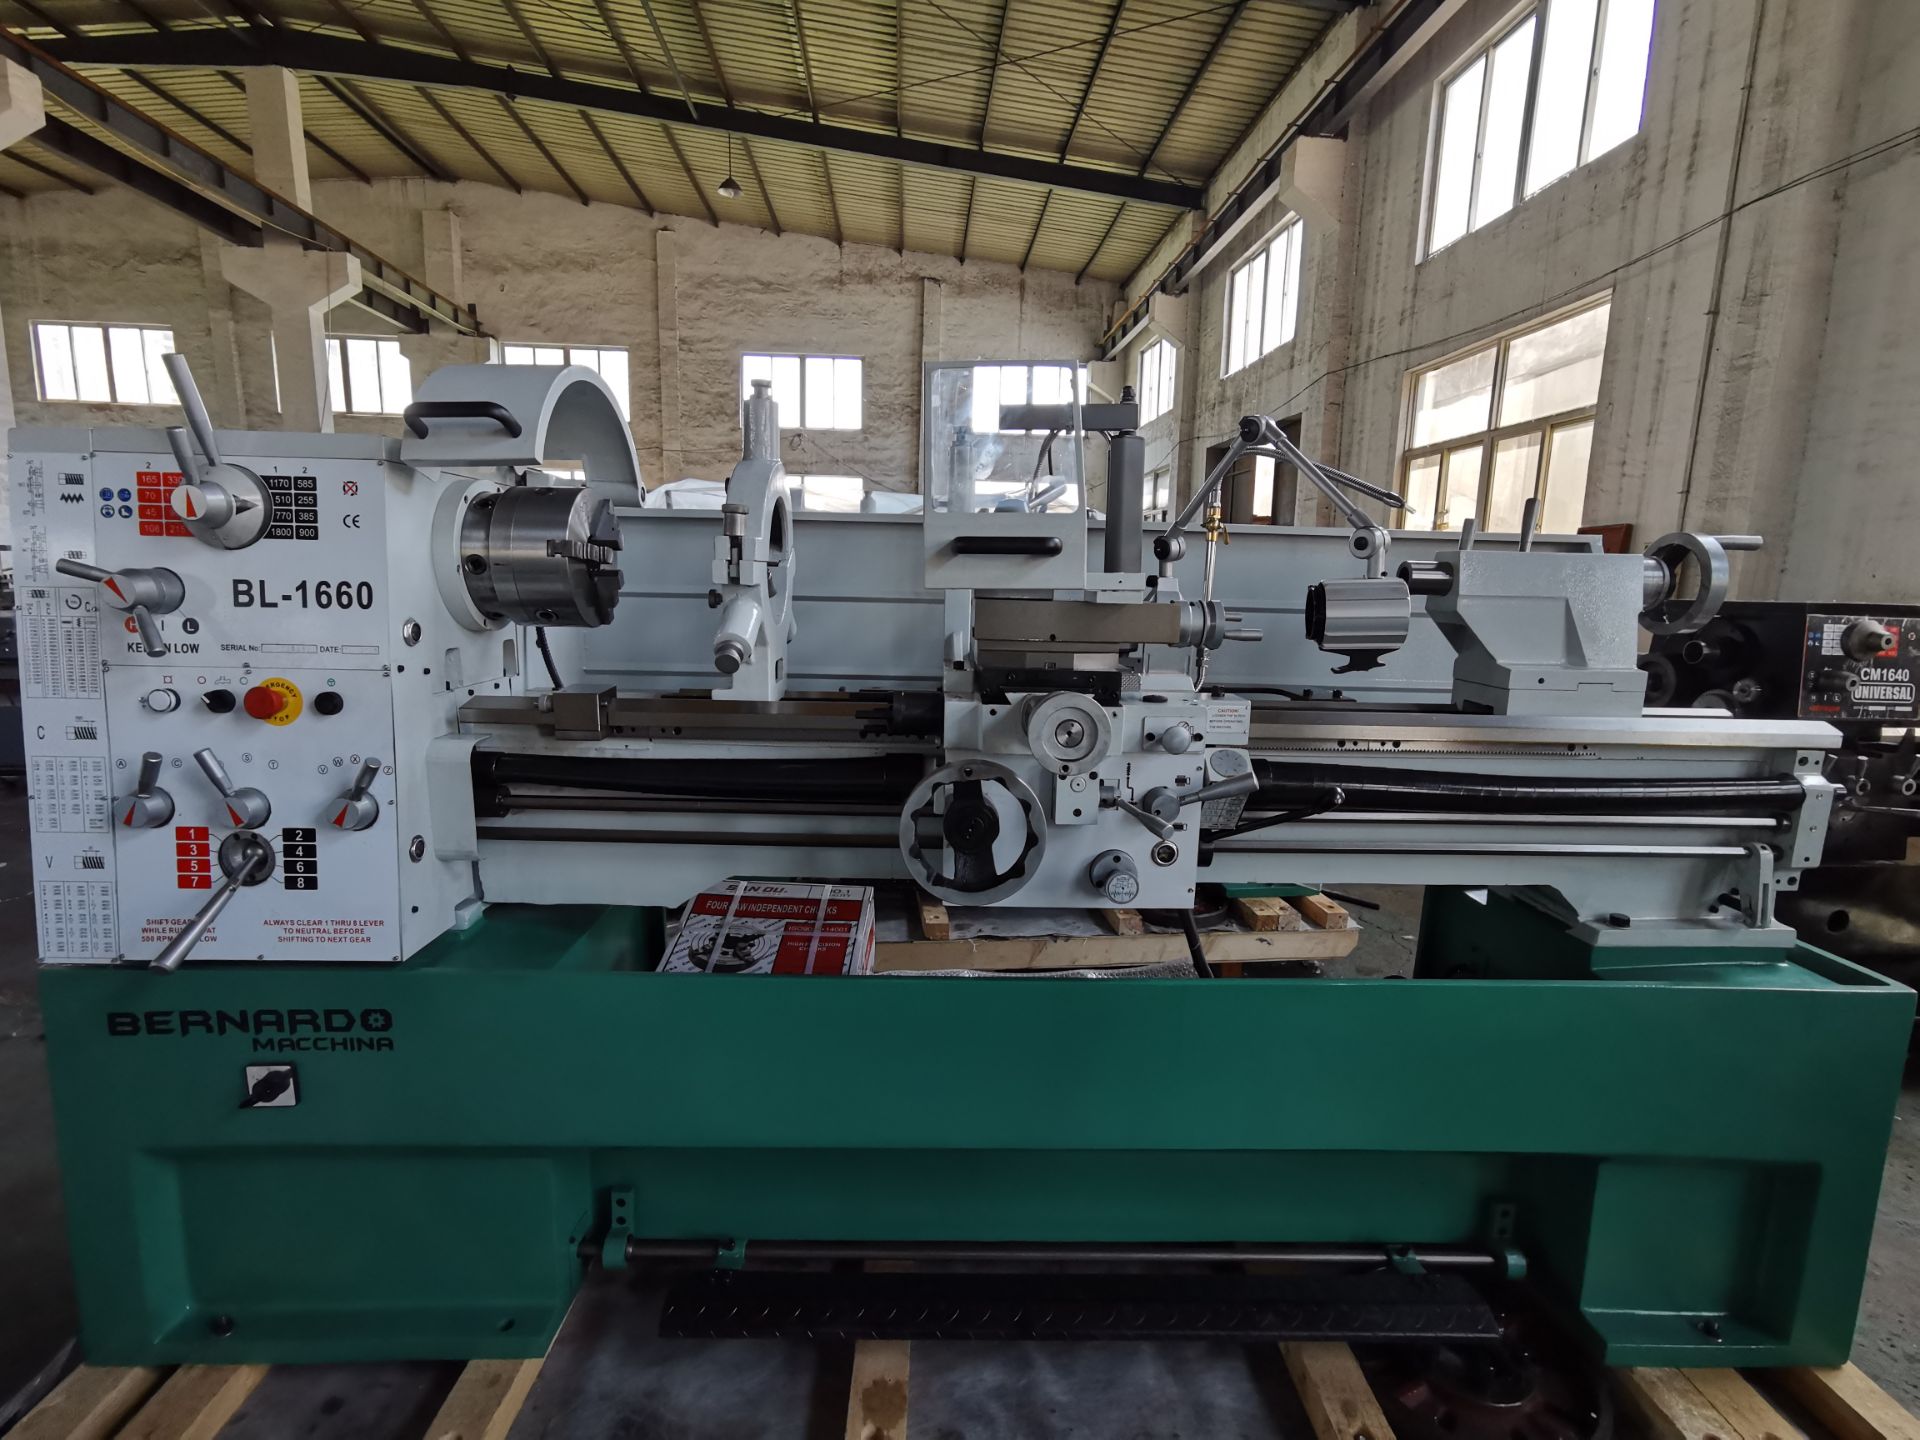 Bernardo Macchina Engine Lathe model BL1660 - 16" Swing with 60" Between Centres - complete